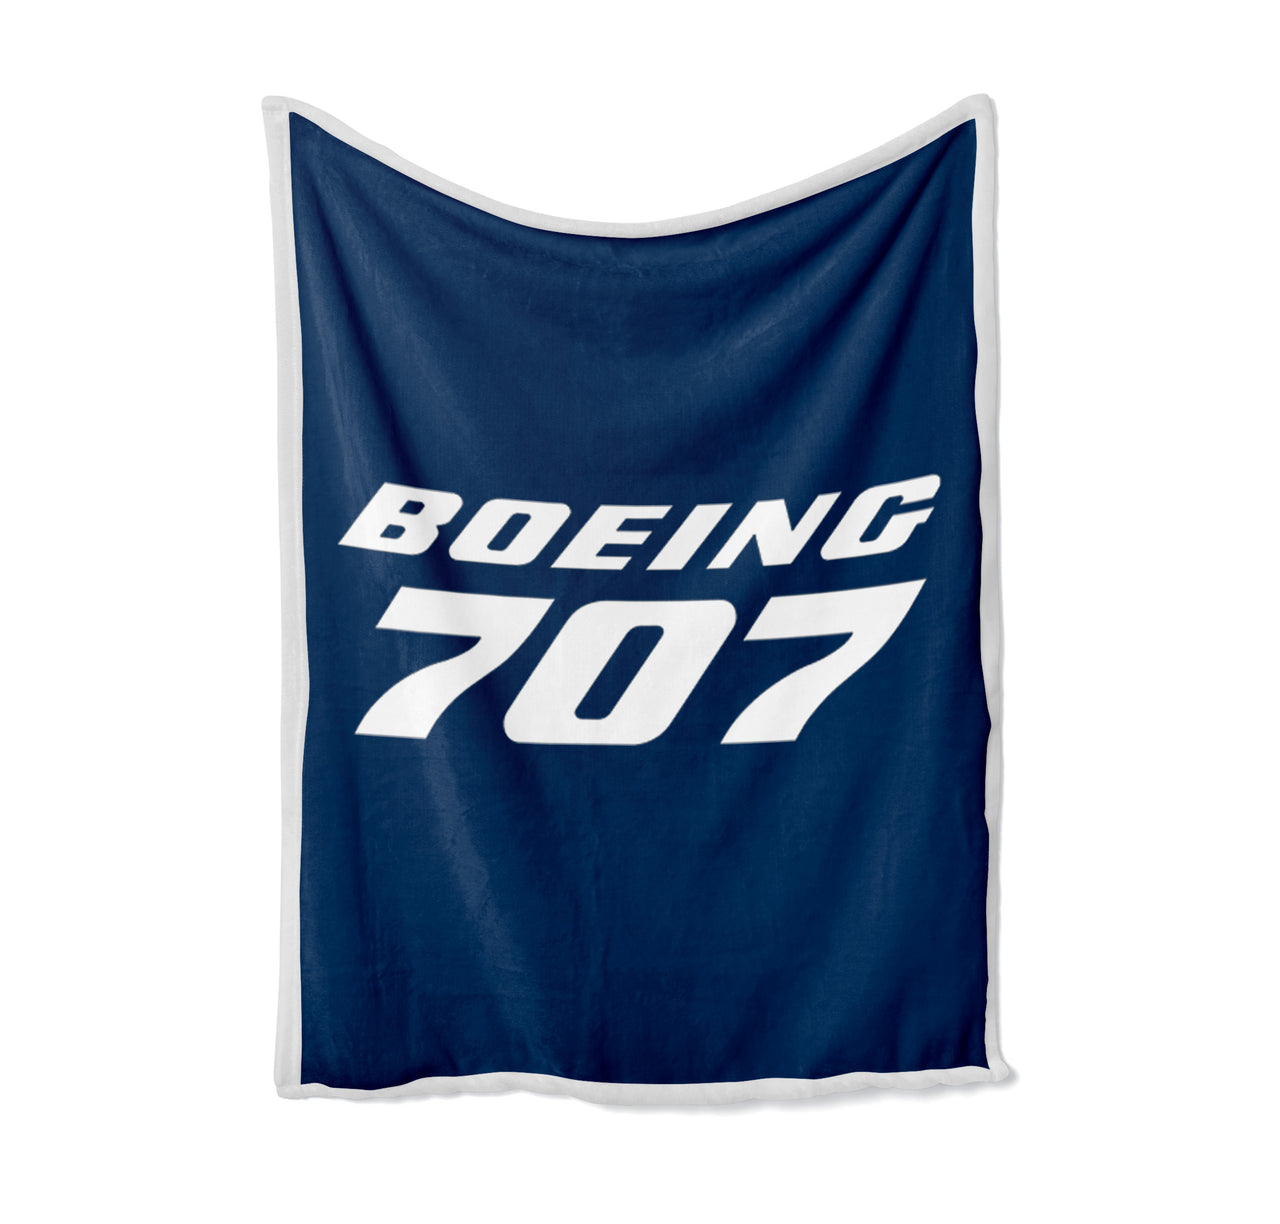 Boeing 707 & Text Designed Bed Blankets & Covers